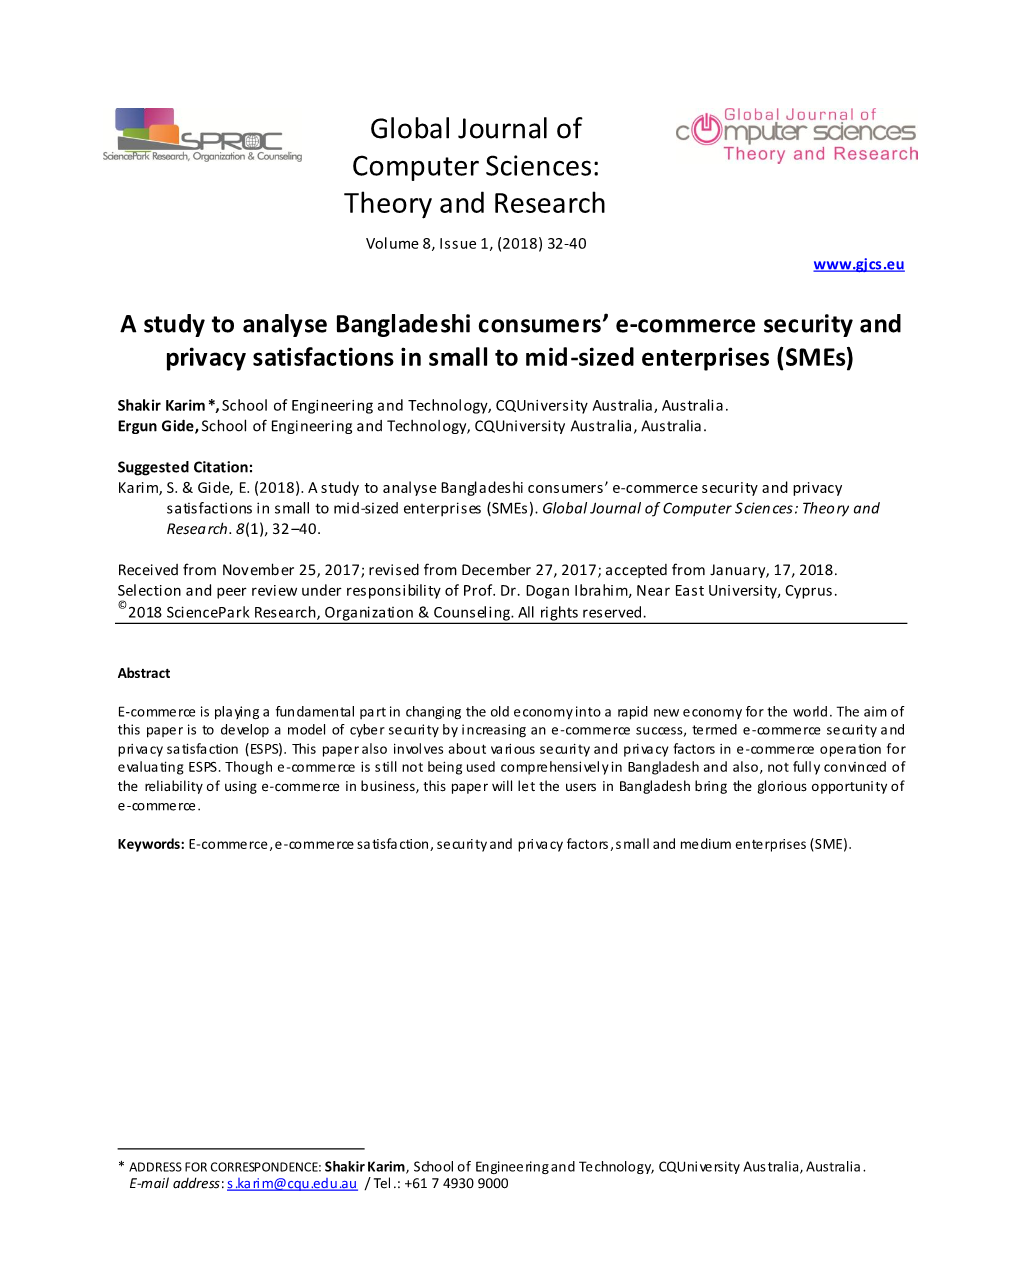 A Study to Analyse Bangladeshi Consumers' E-Commerce Security and Privacy Satisfactions in Small to Mid-Sized Enterprises